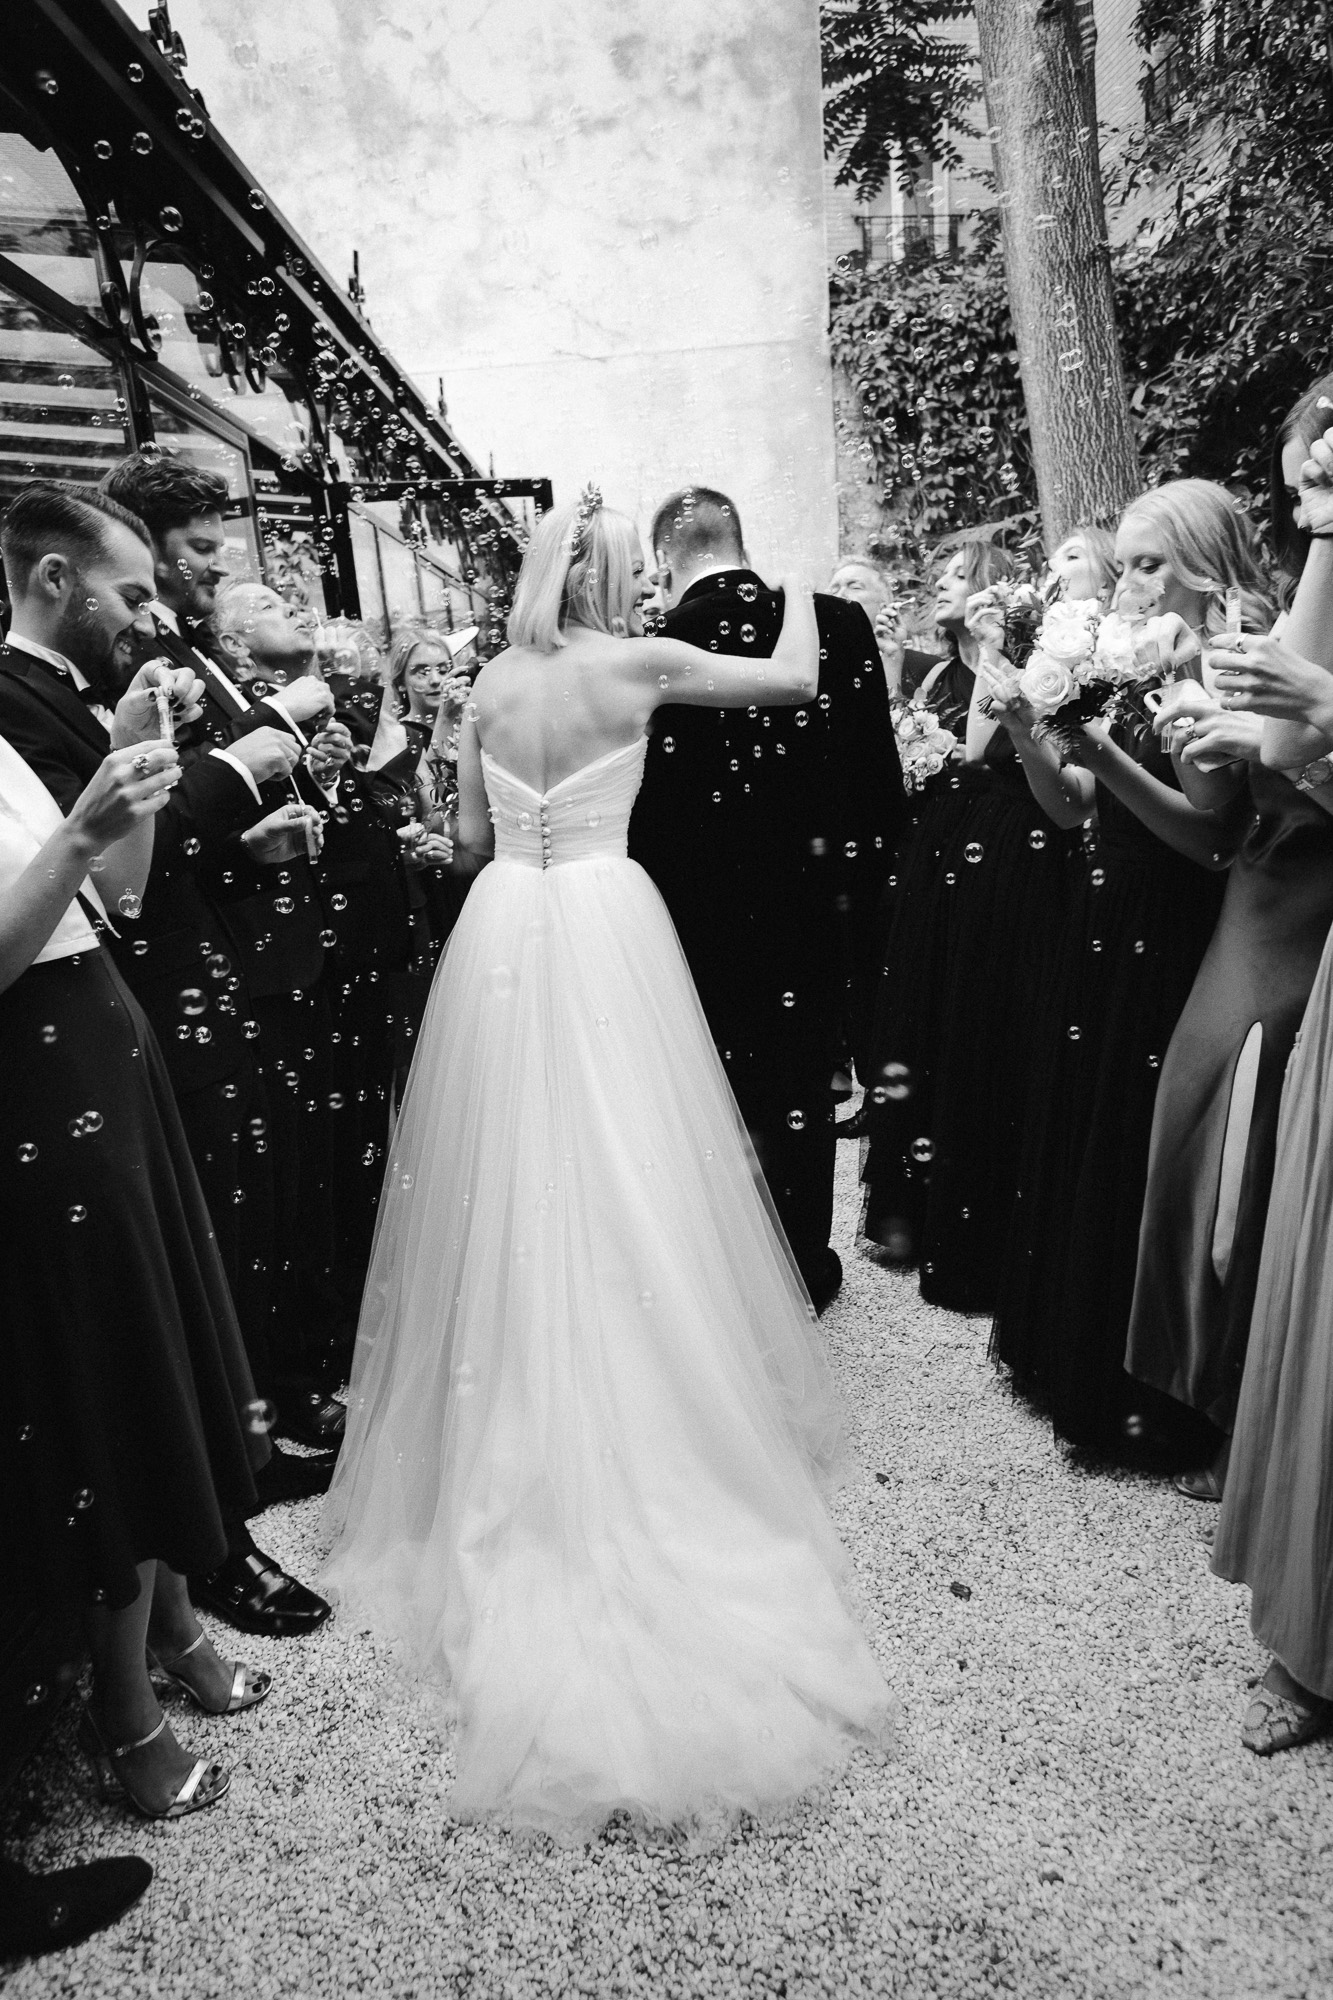 Paris wedding photographer: the guests are waiting for the newlyweds to meet them in the patio and are blowing lots of bubbles in the meantime